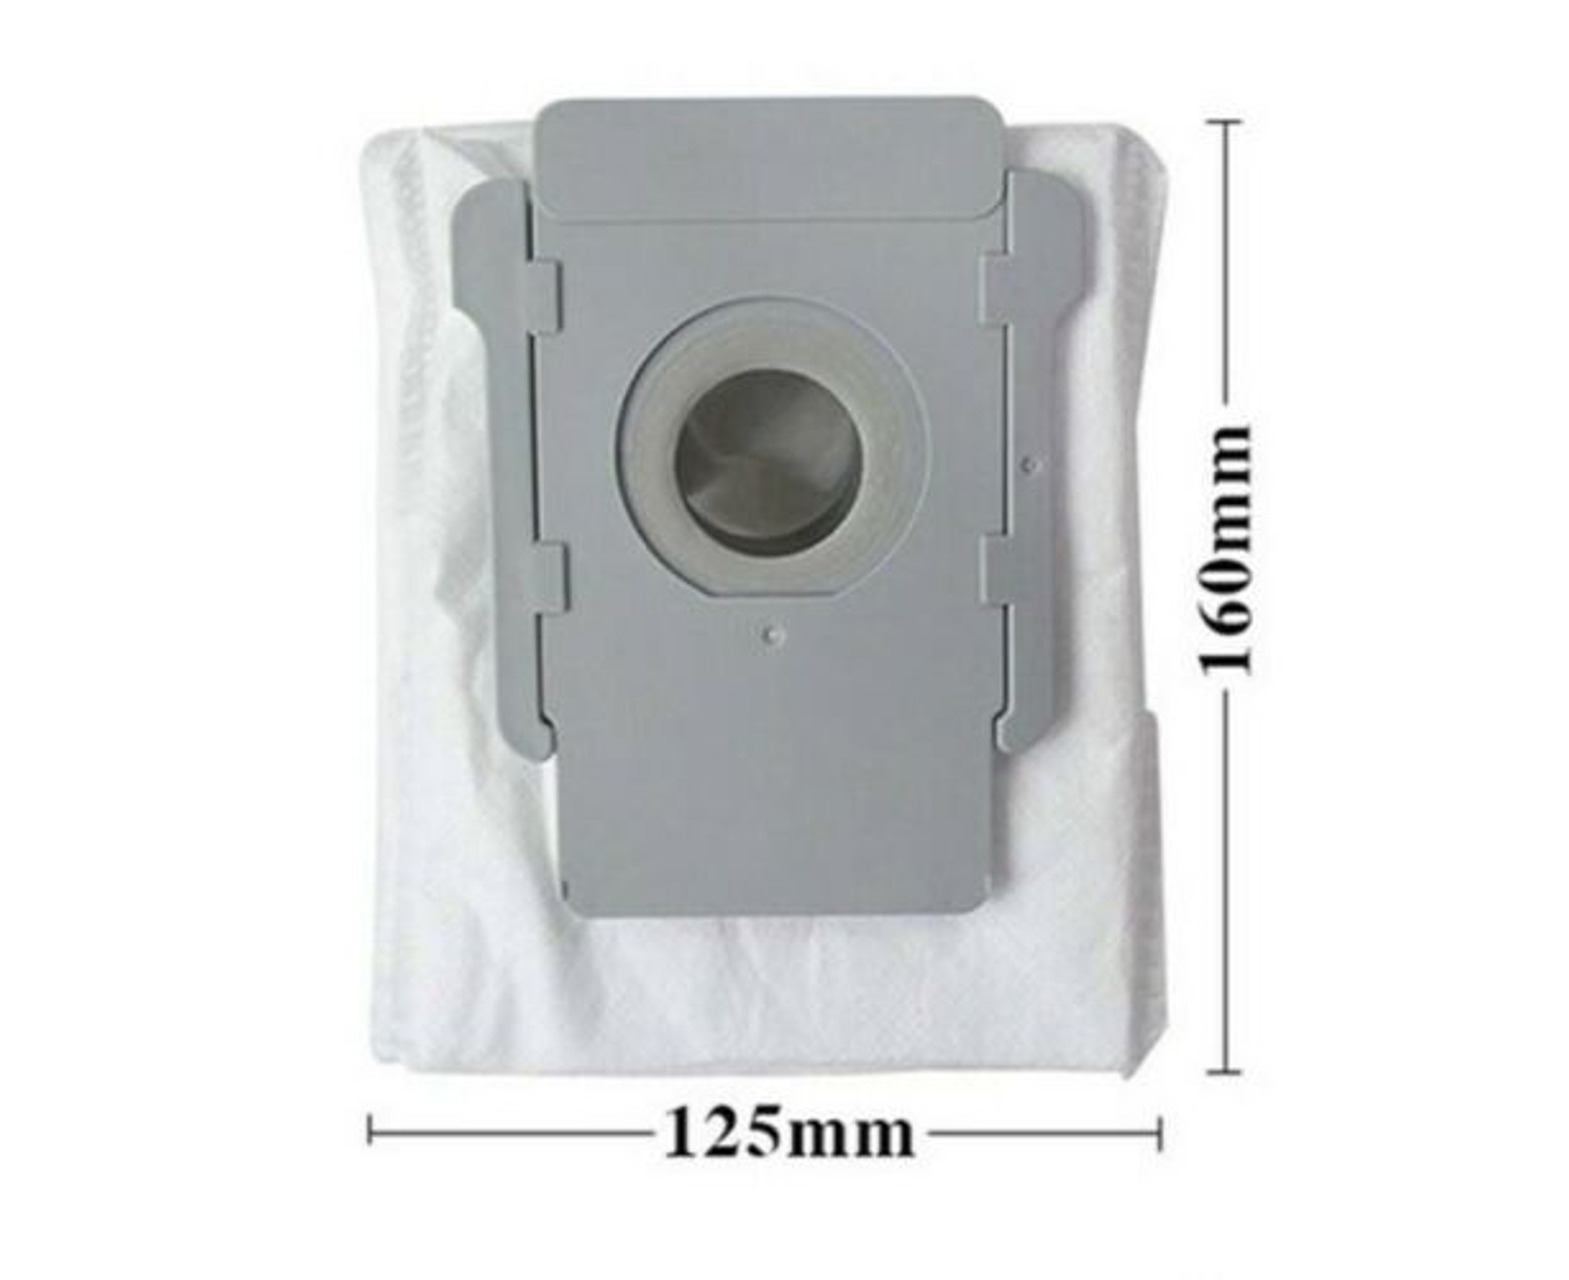 3 X vacuum bags for iRobot Roomba i3+, i7+ and s9+ robot vacuum cleaners |  Www.catch.com.au